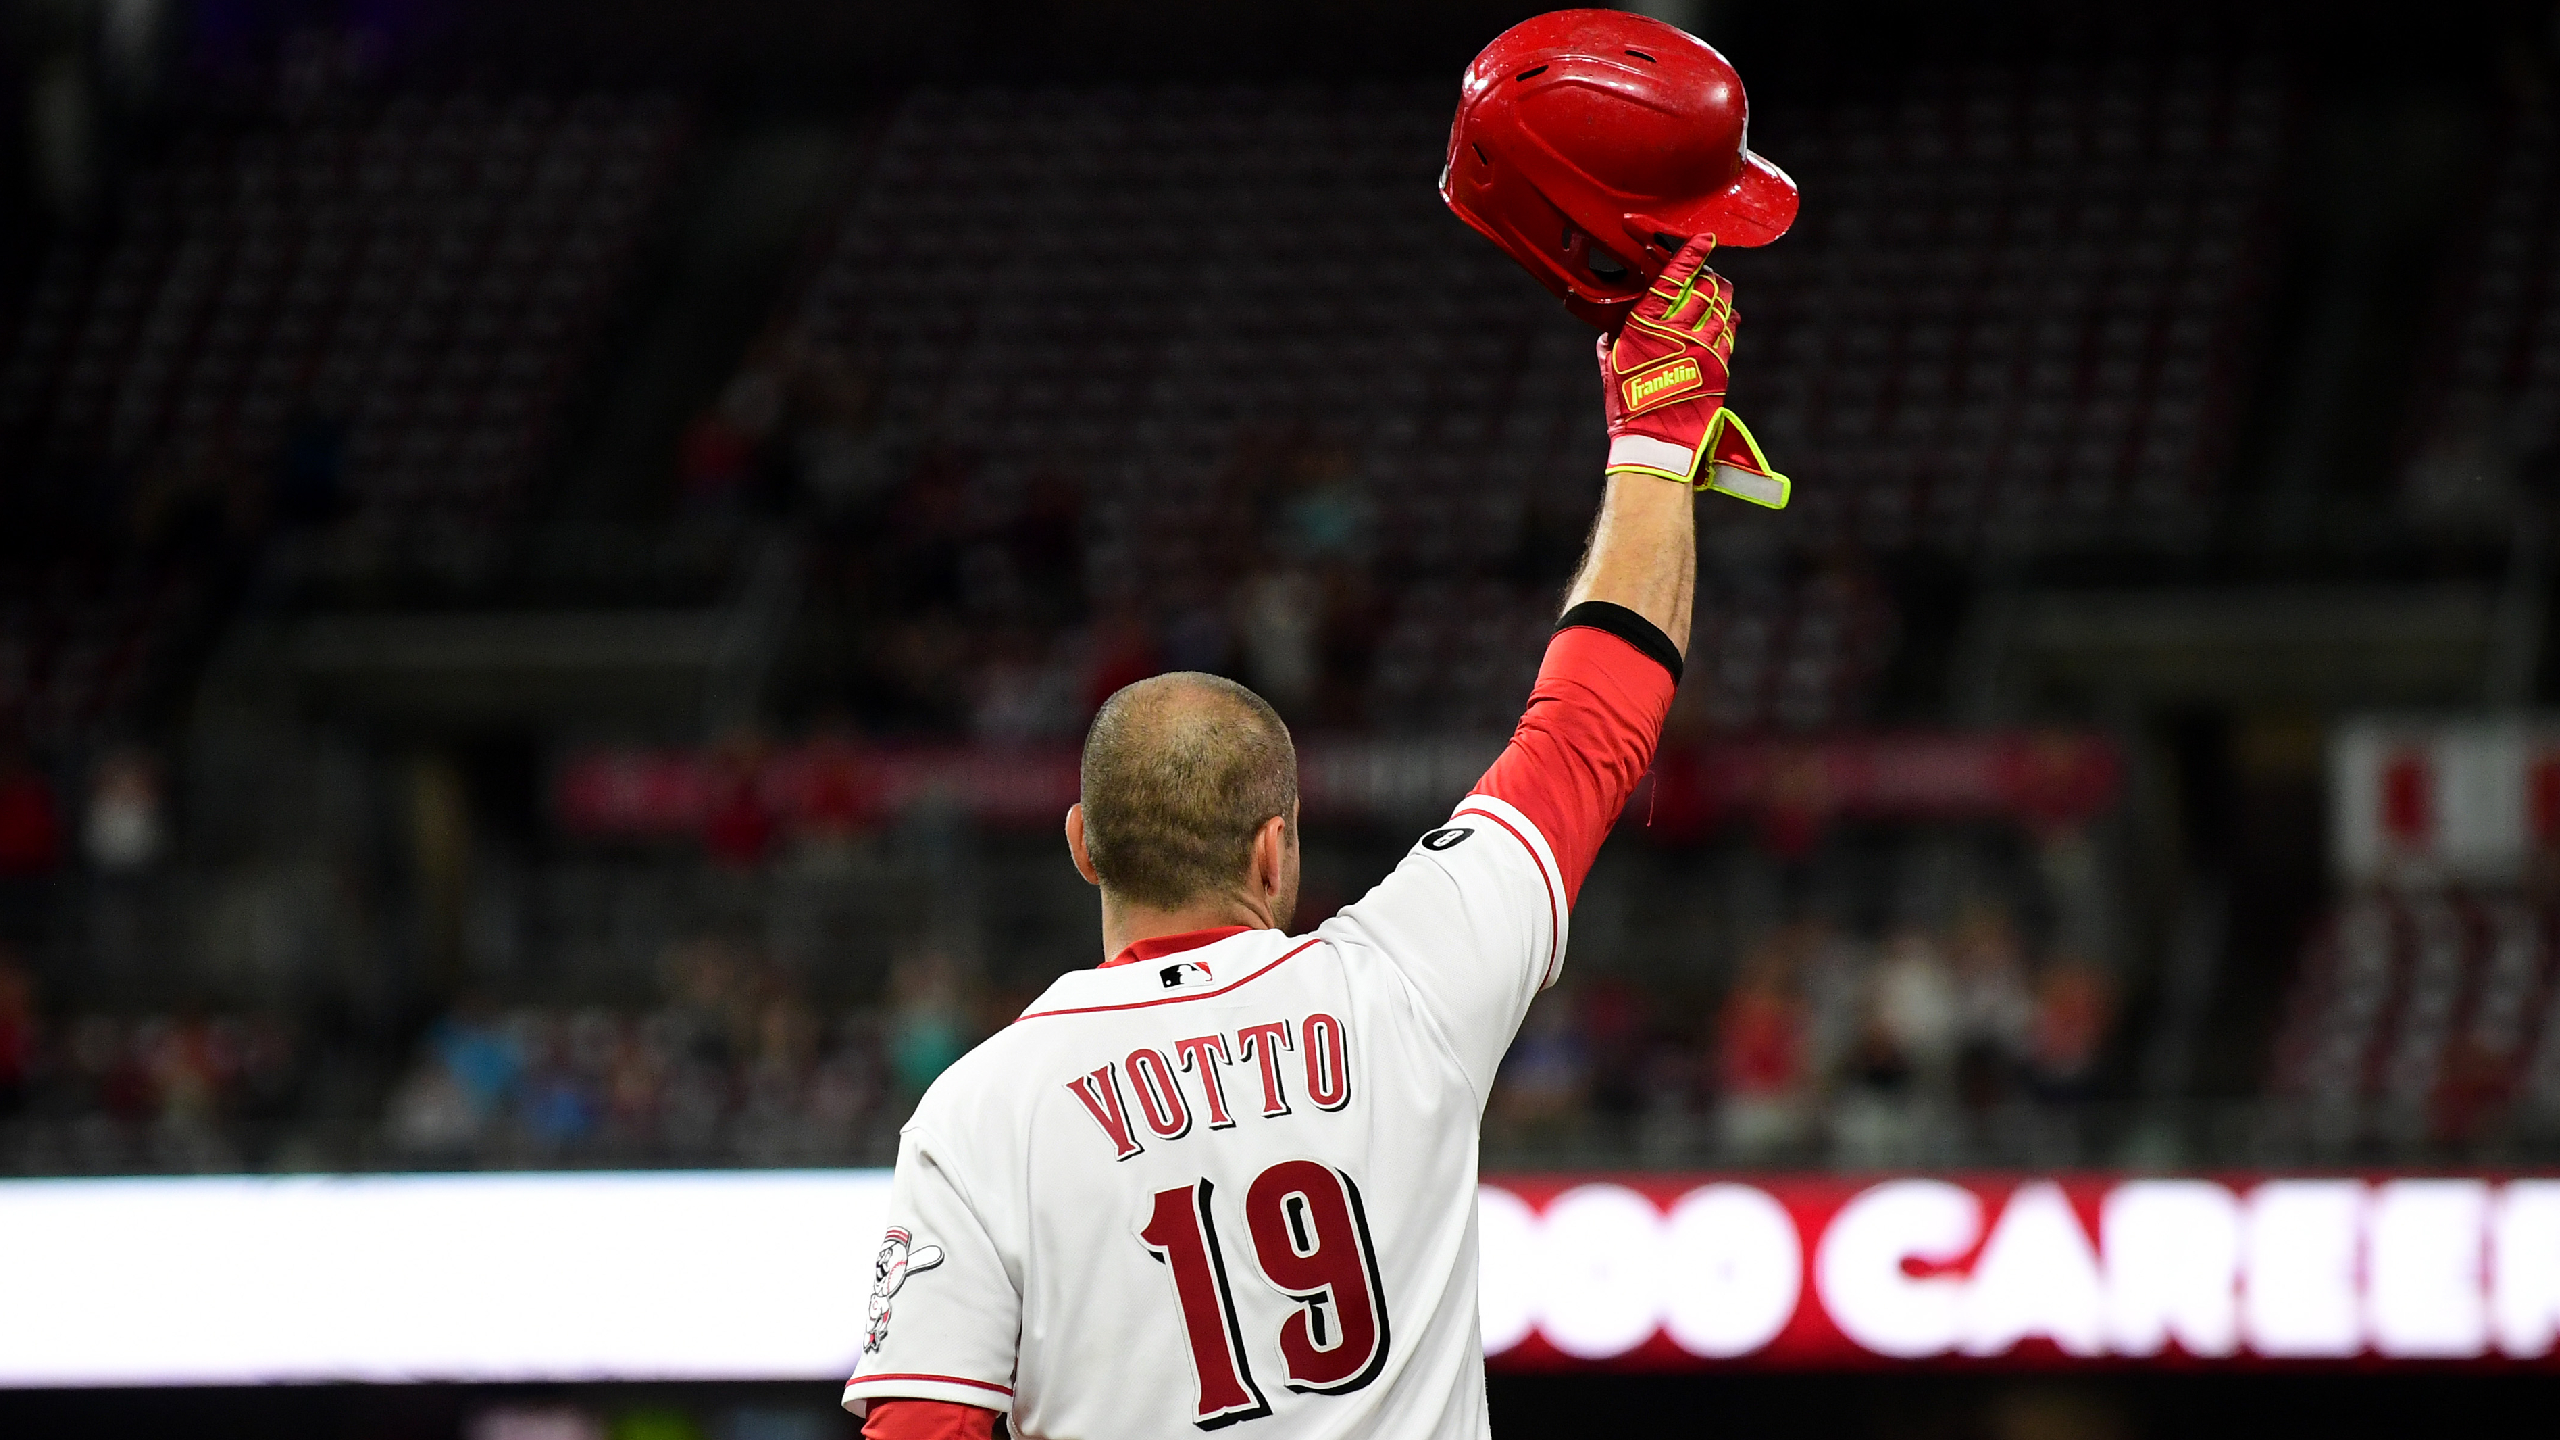 How Joey Votto of the Reds Became a Social Media Star - The New York Times